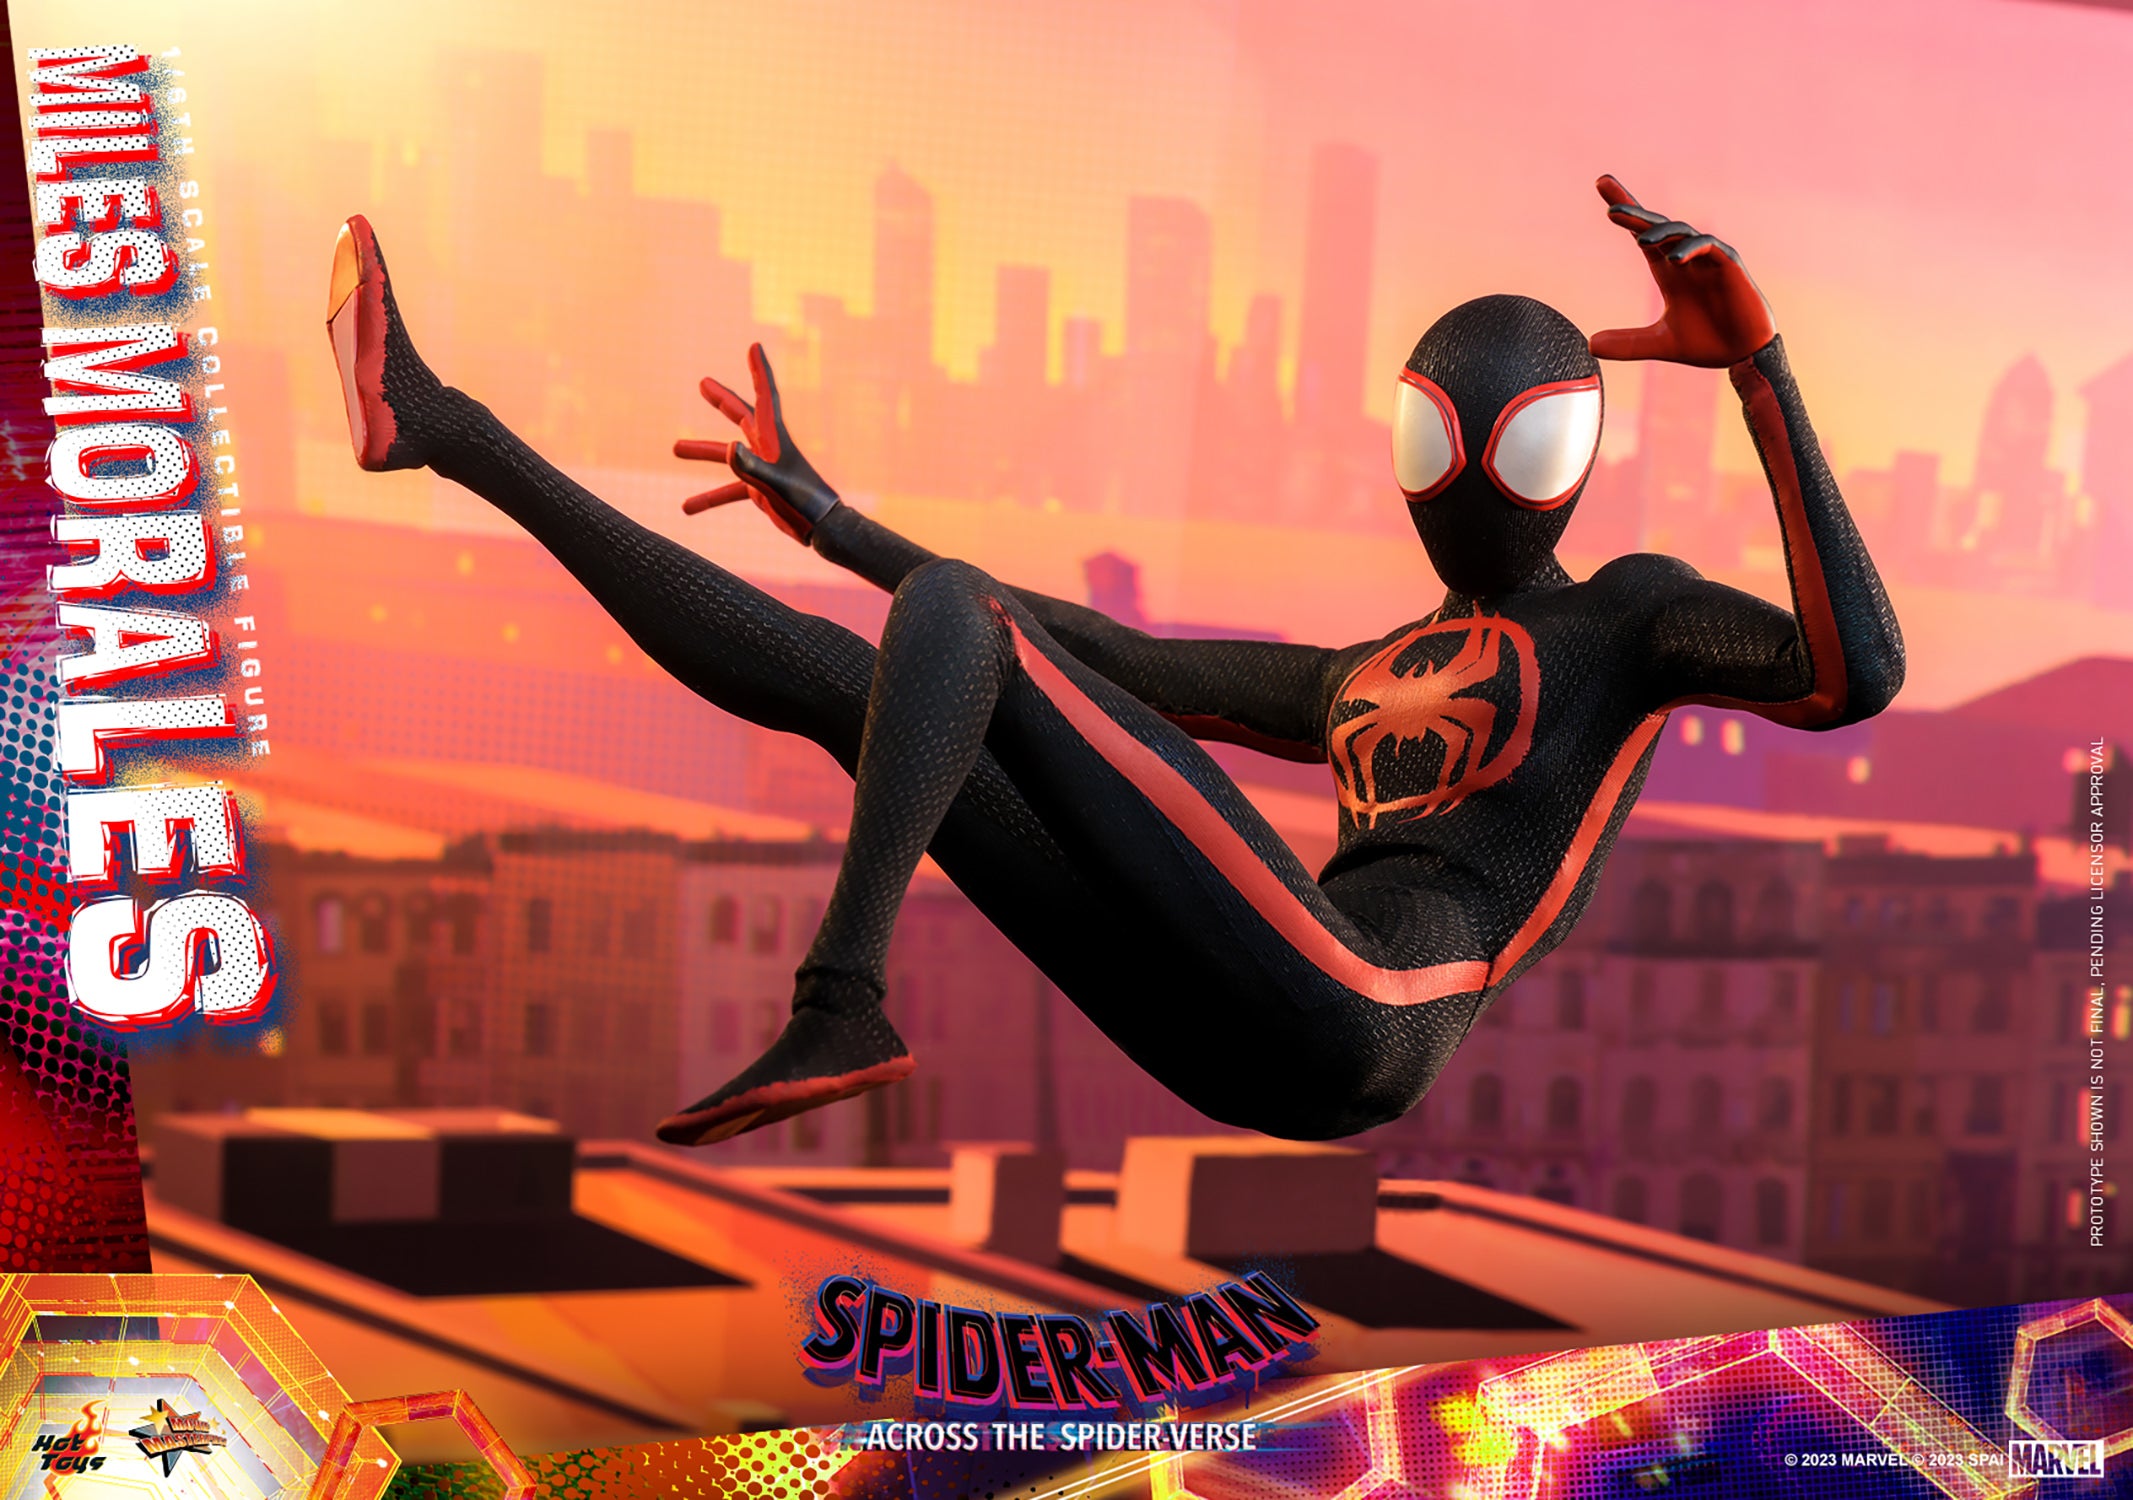 Hot Toys Miles Morales 'Spider-Man' Figure Release Info